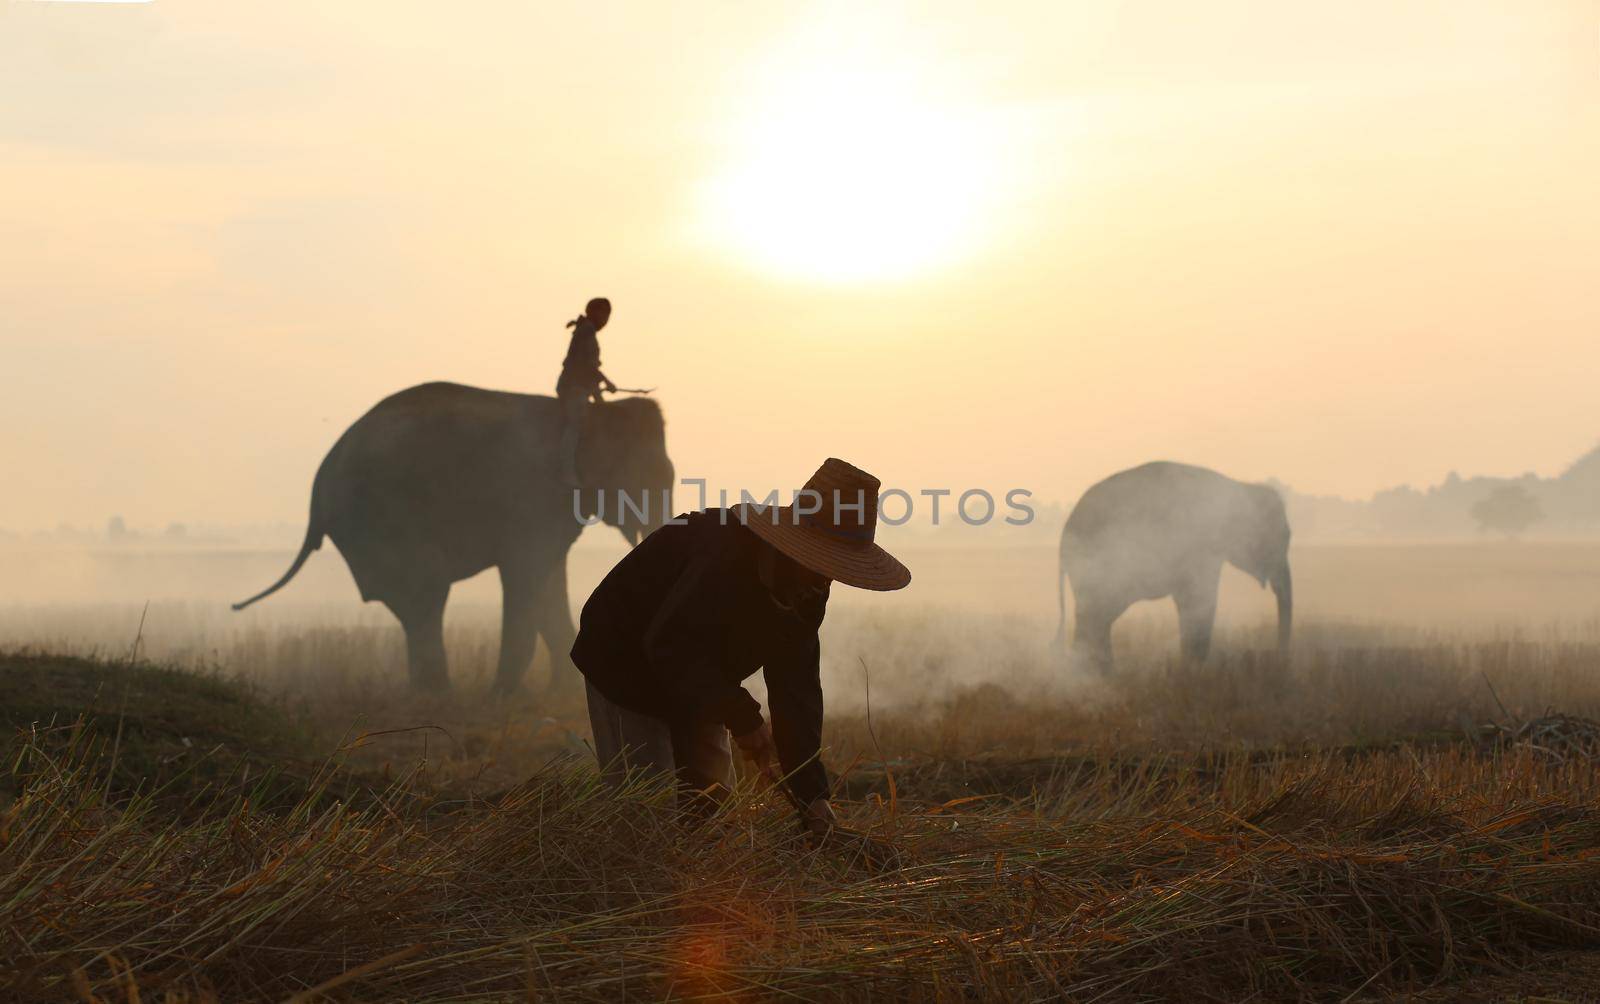 Farmers in Thailand.
Thailand Countryside; Silhouette elephant on the background of sunset, elephant Thai in Surin Thailand.